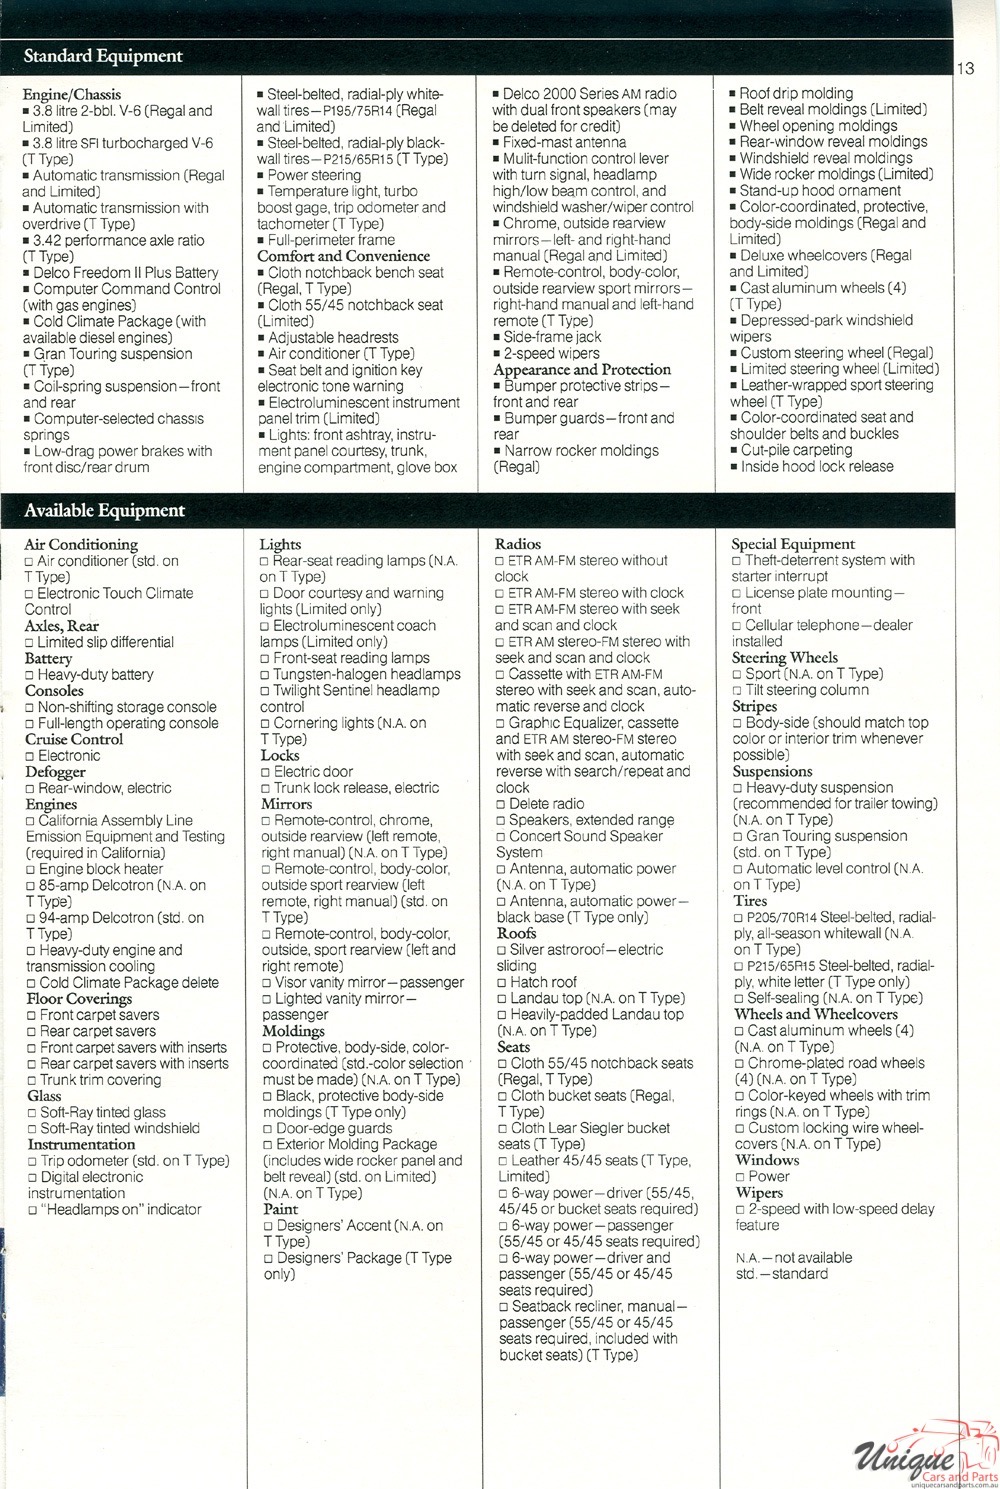 1985 Buick Buying Guide Page 14